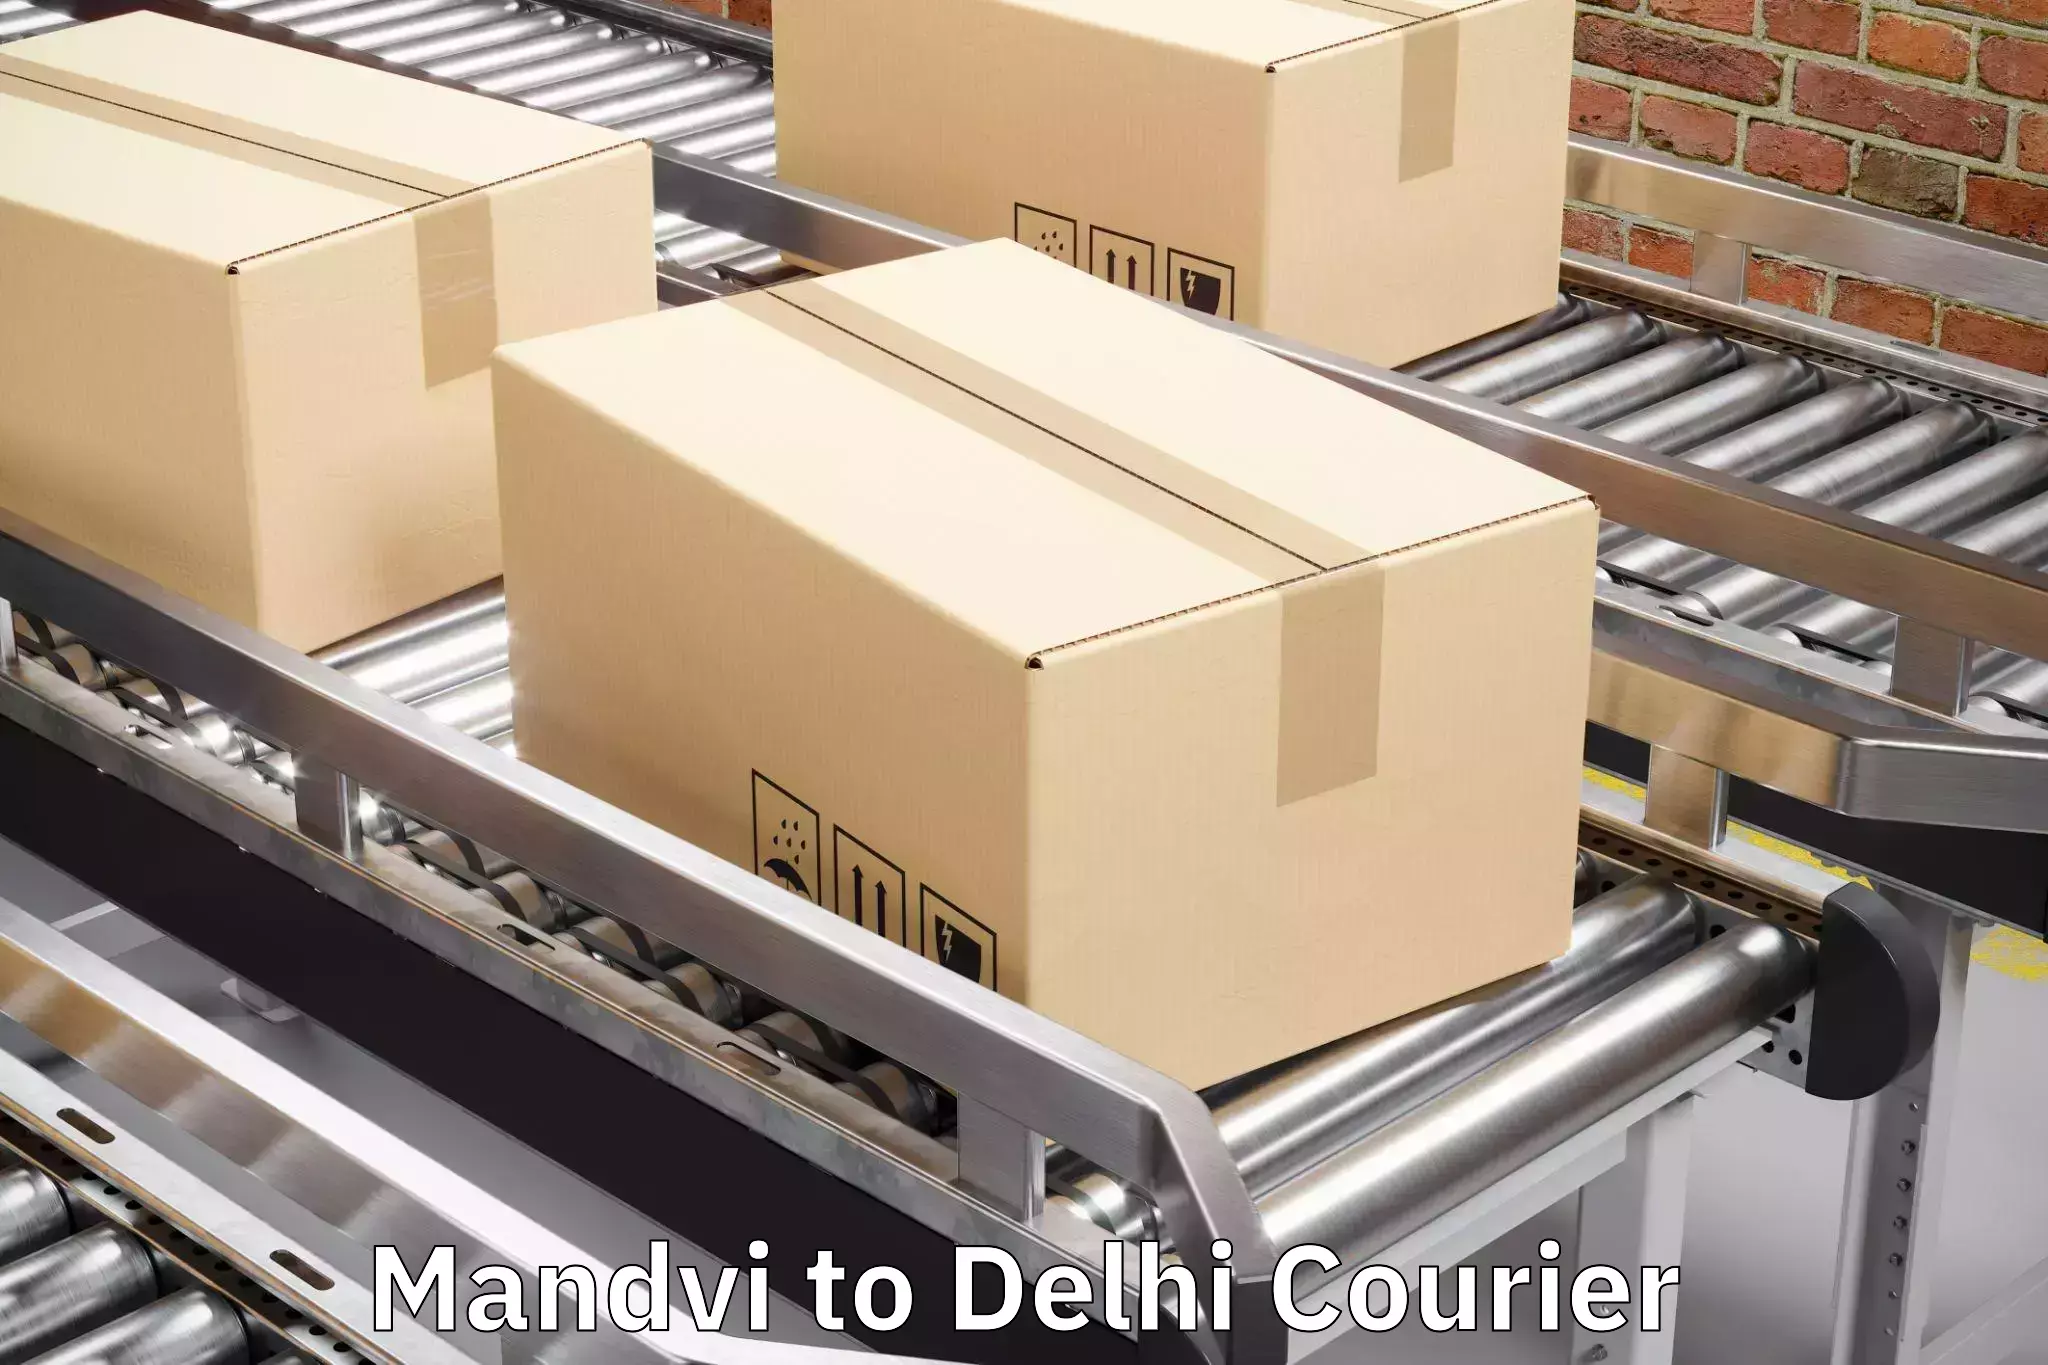 Automated luggage transport in Mandvi to University of Delhi